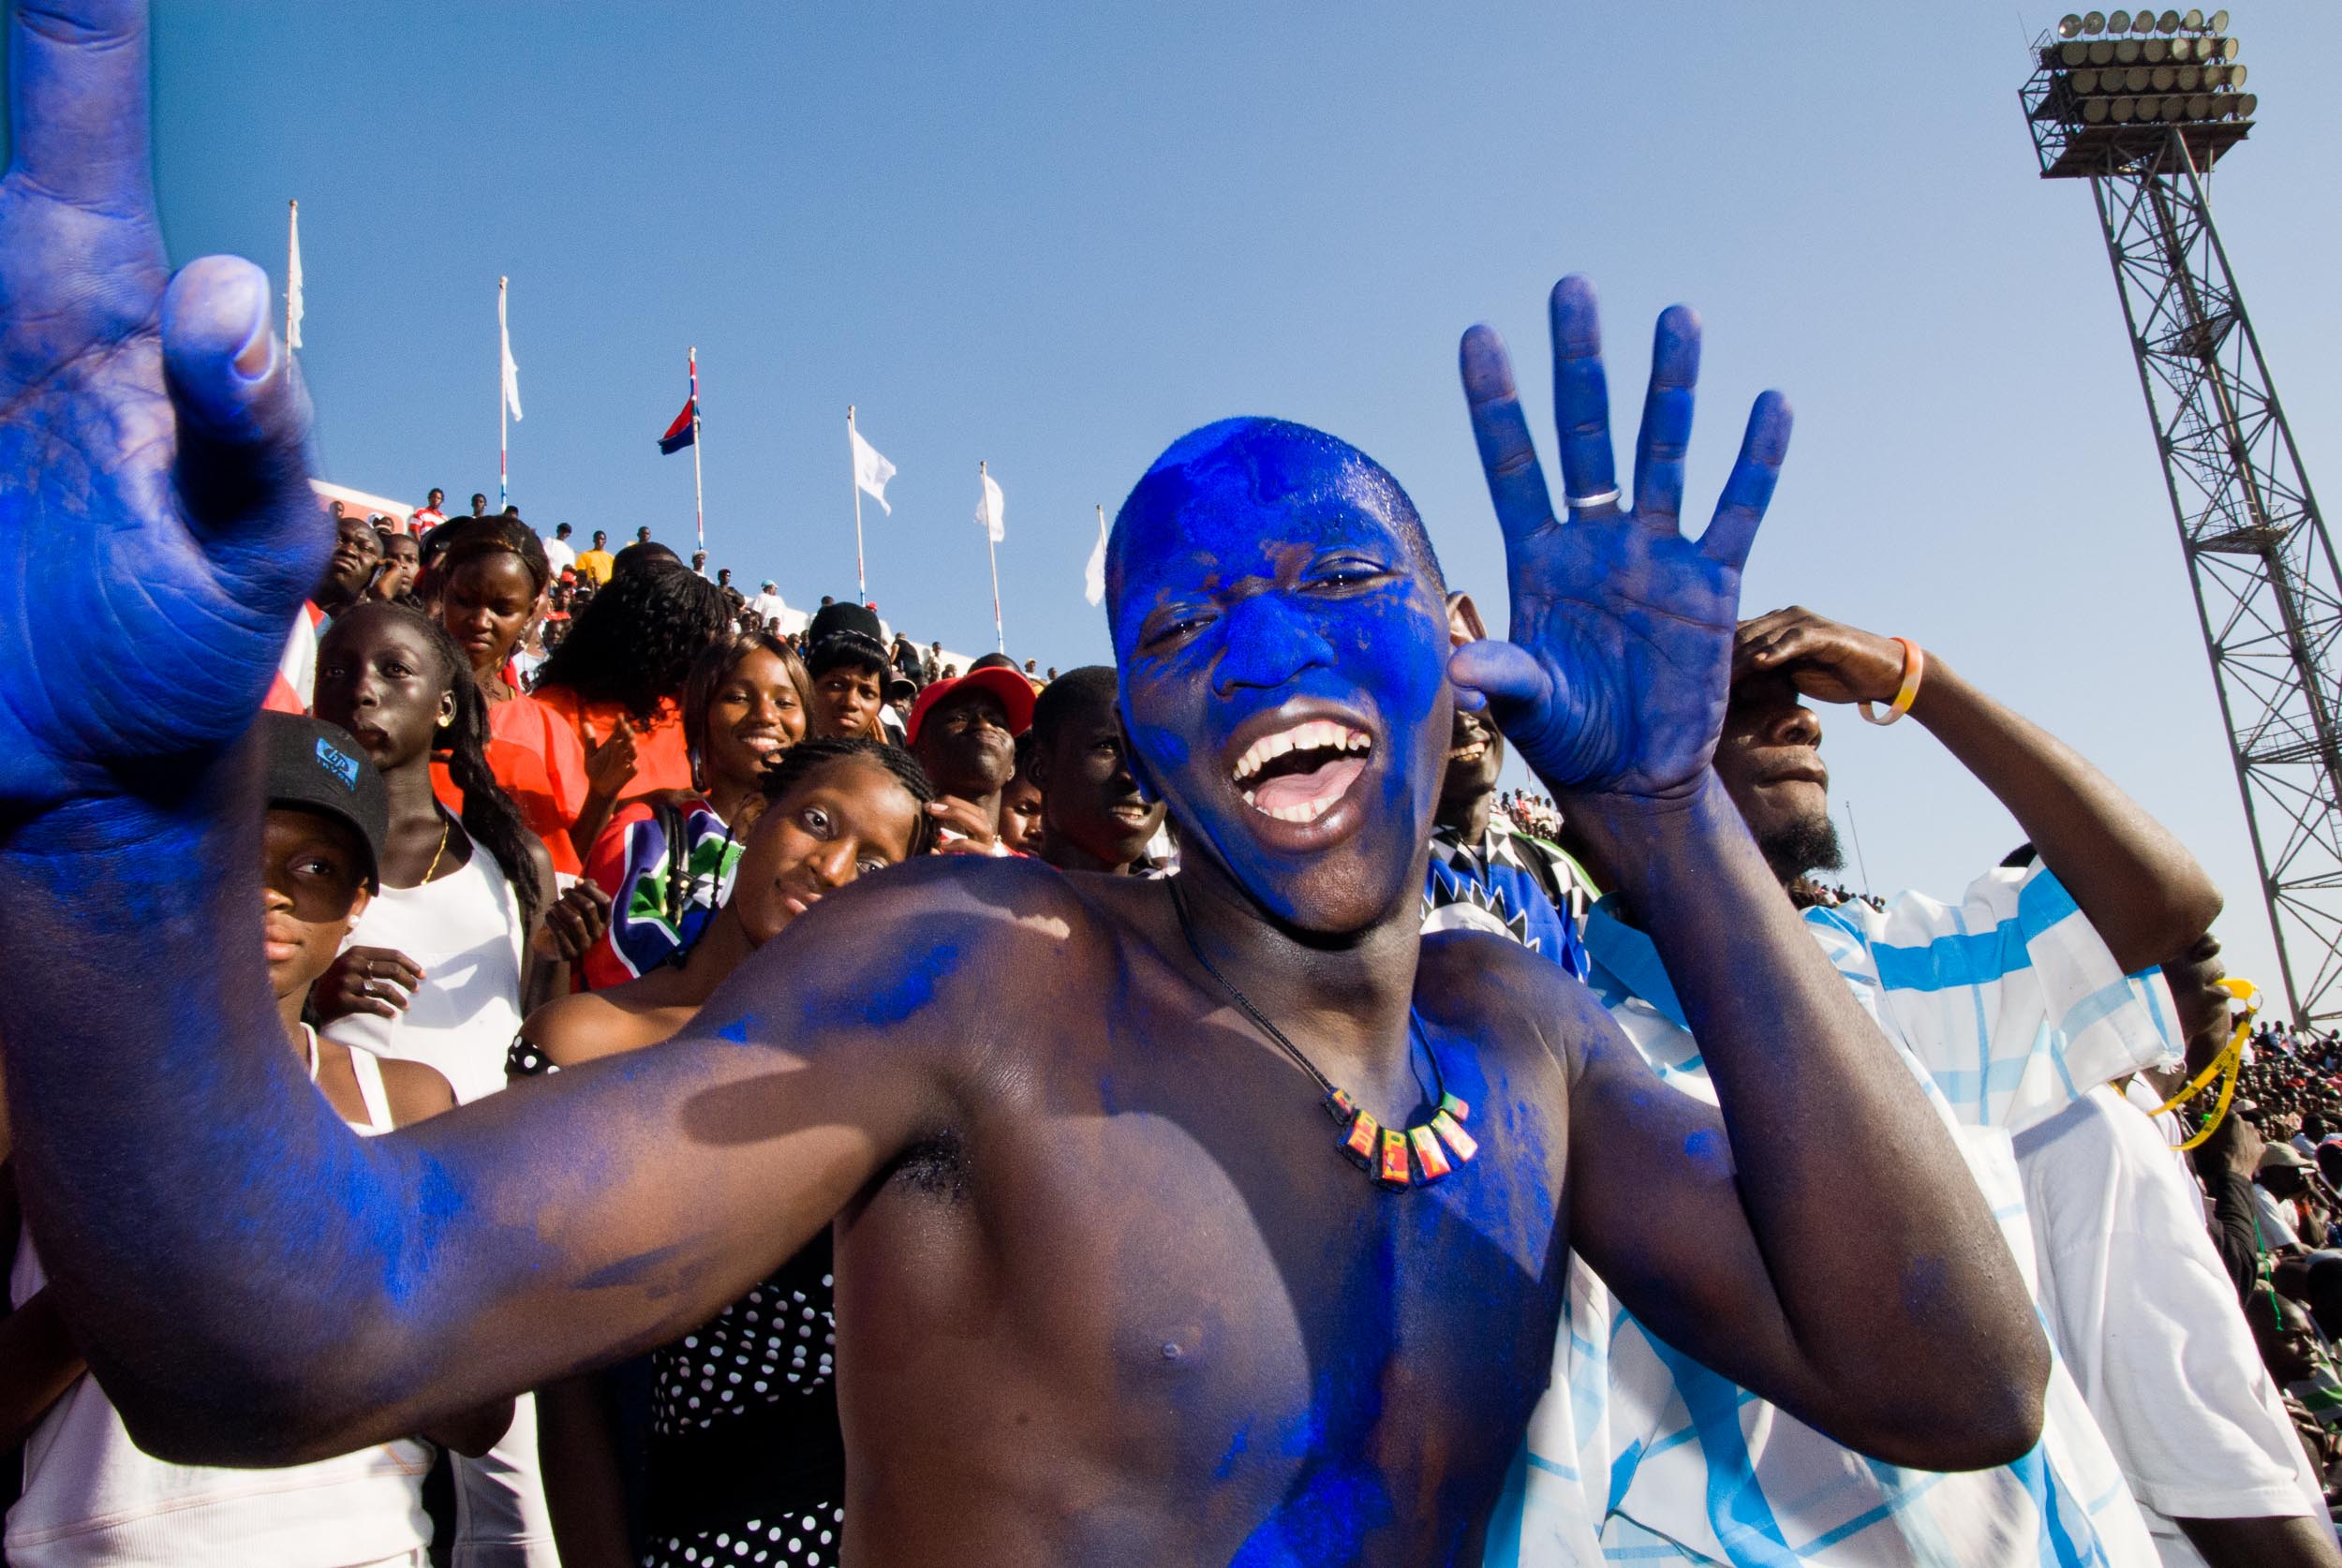  Scorpions, Football Fans of National Team, Gambia, Africa 